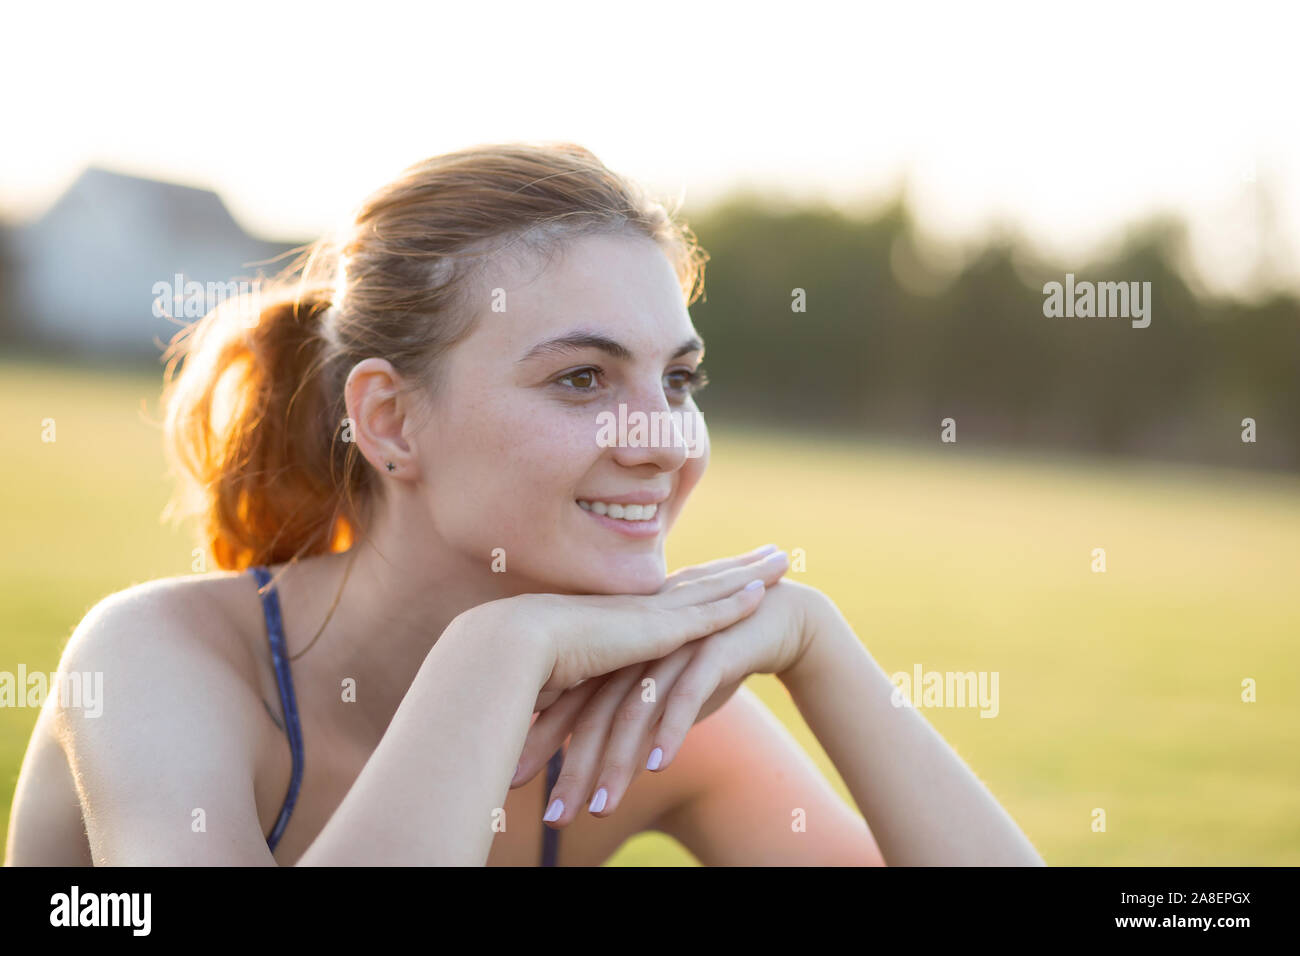 Close up portrait of cheerful smiling young girl with freckles on her face outdoors in sunny summer day. Human expressions and emotions concept. Stock Photo